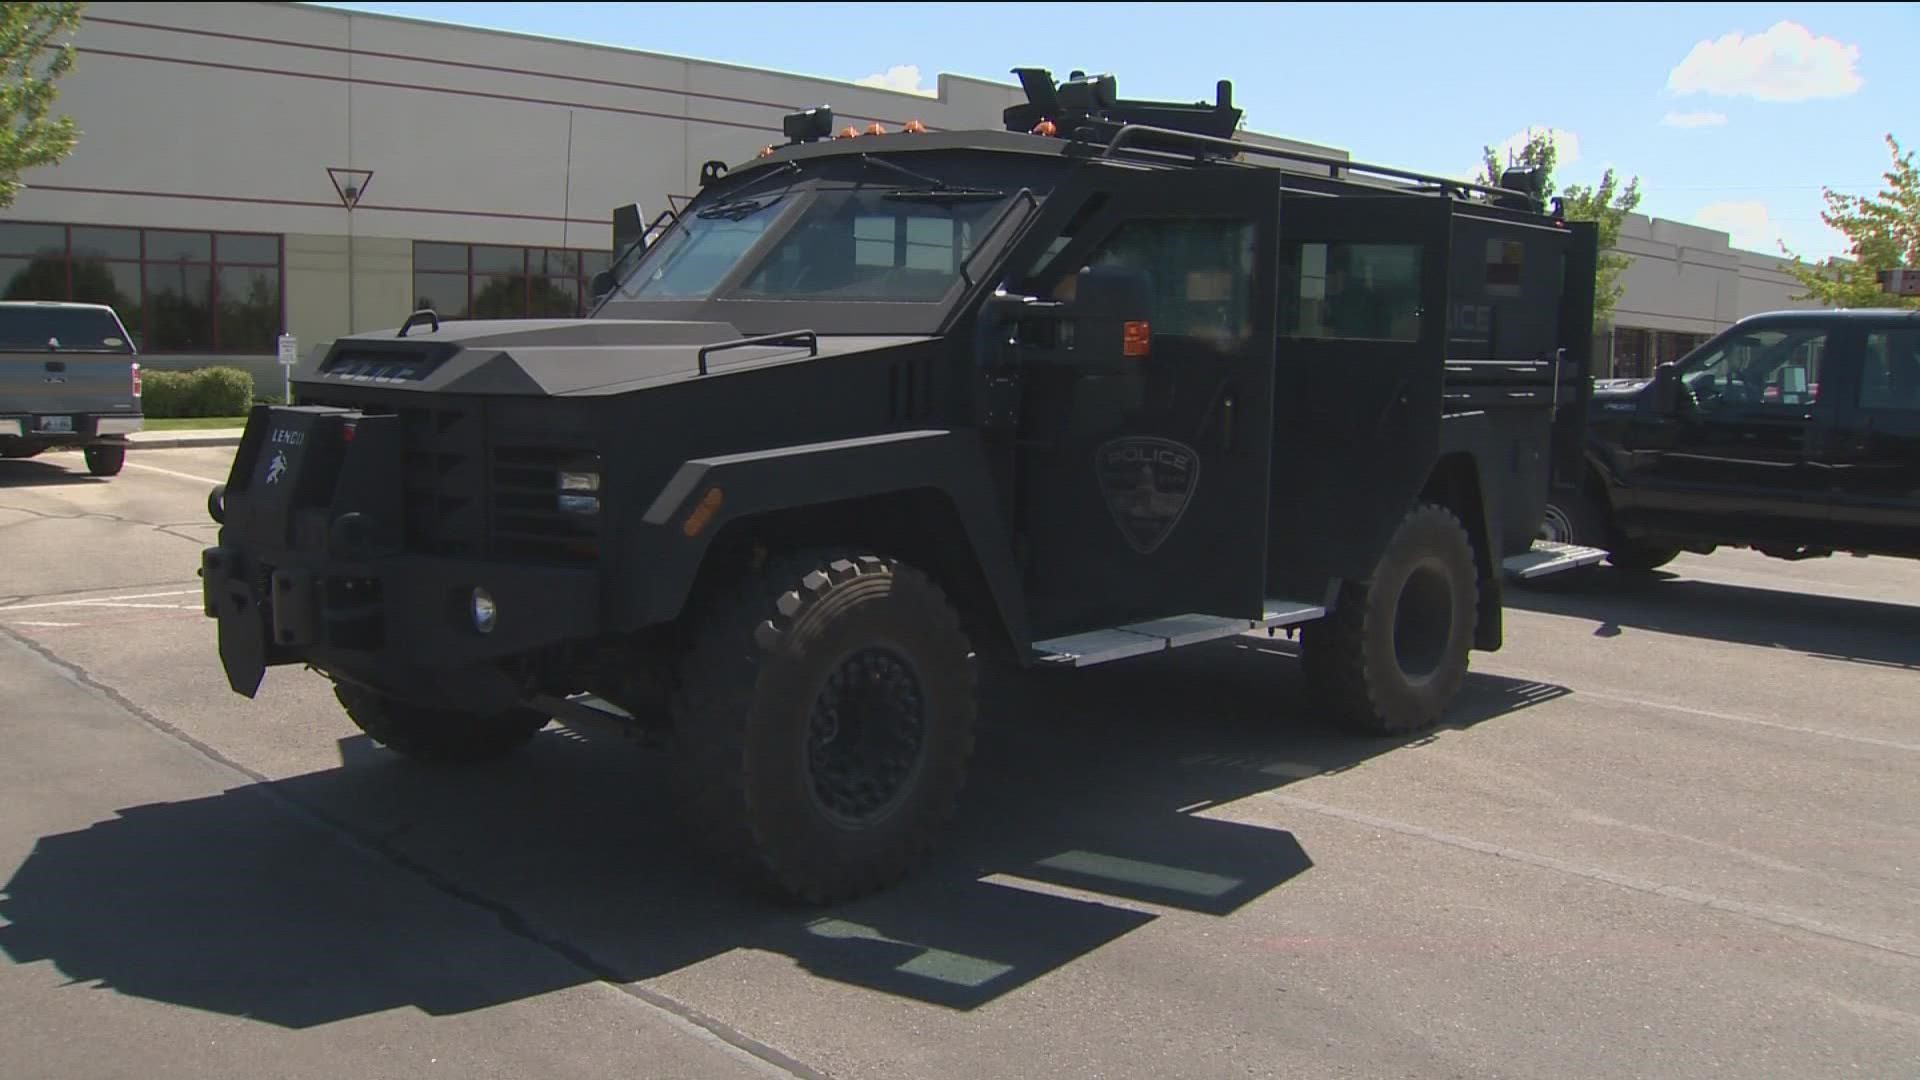 The department was previously using a surplus military vehicle. The new one will cost $377,000.